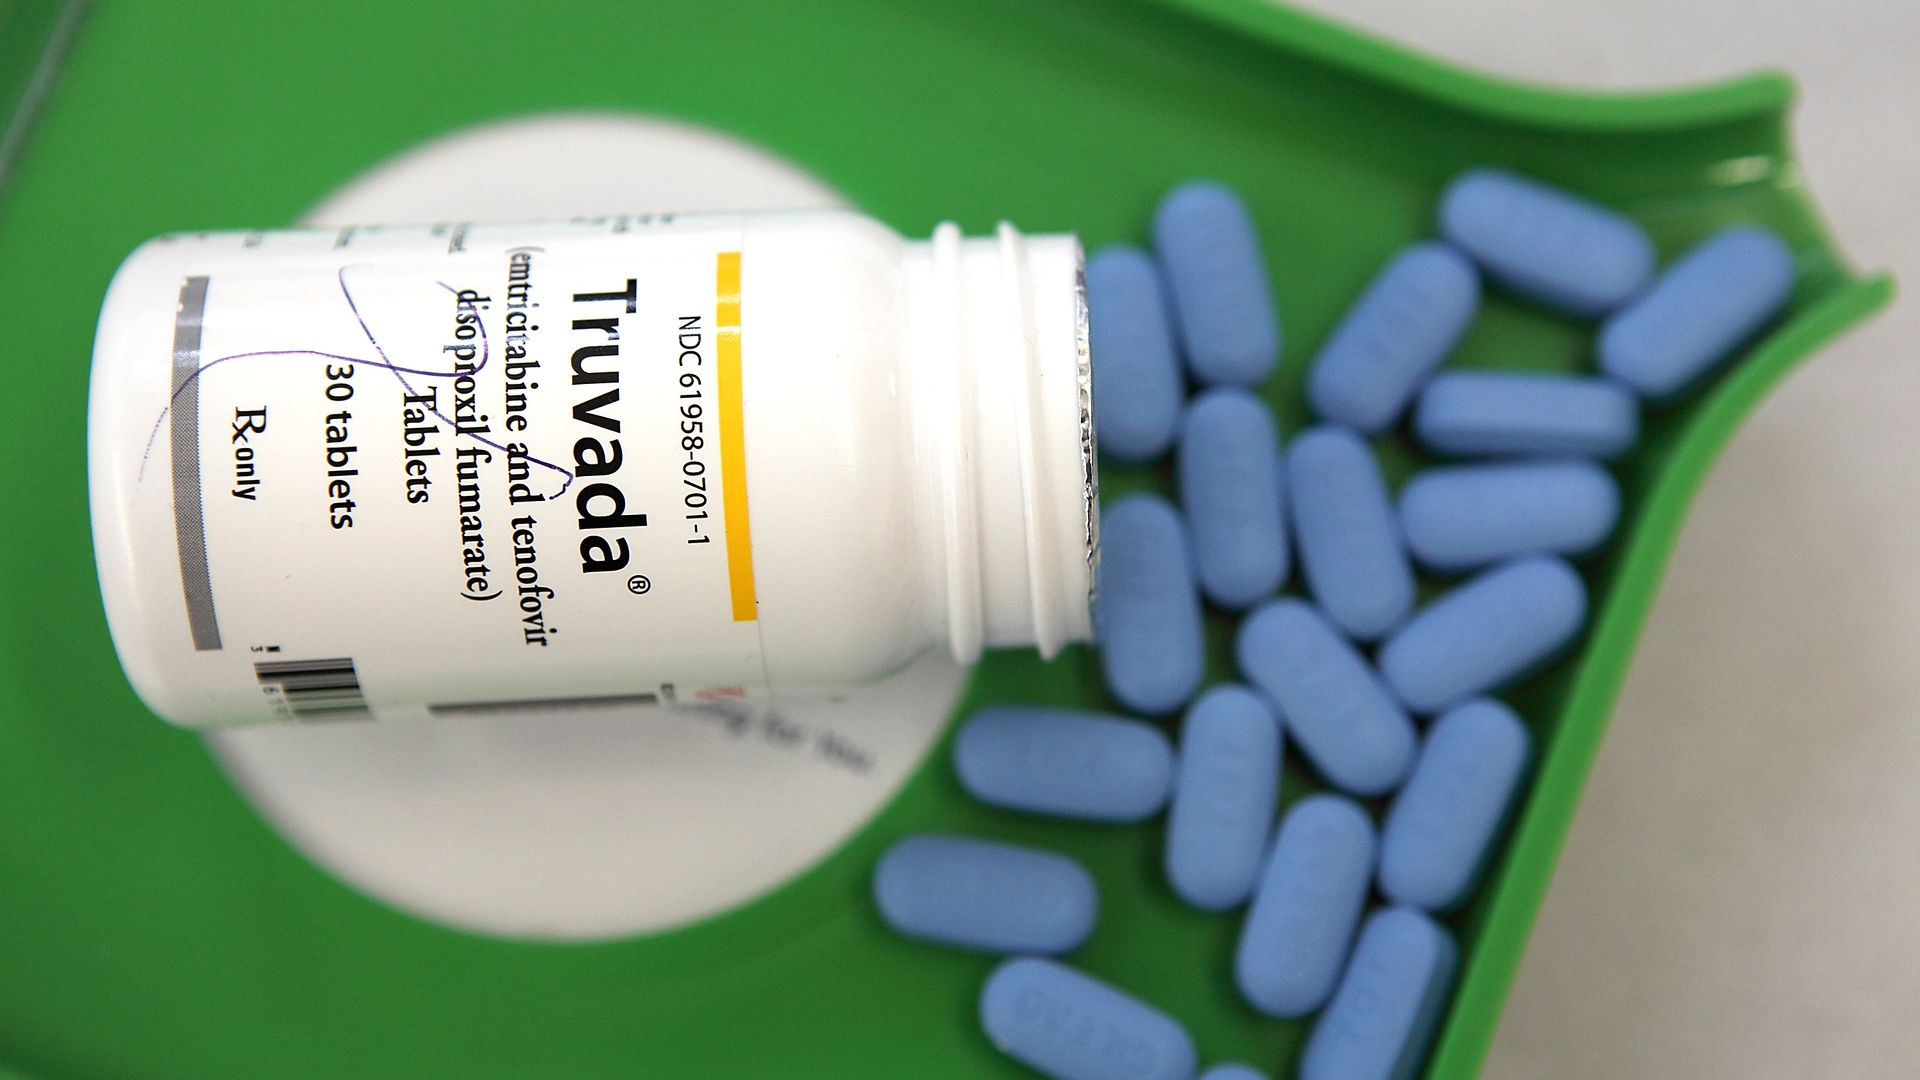 In this image, blue pills spill out of a Truvada pill bottle and onto a green pharmaceutical counting tray.